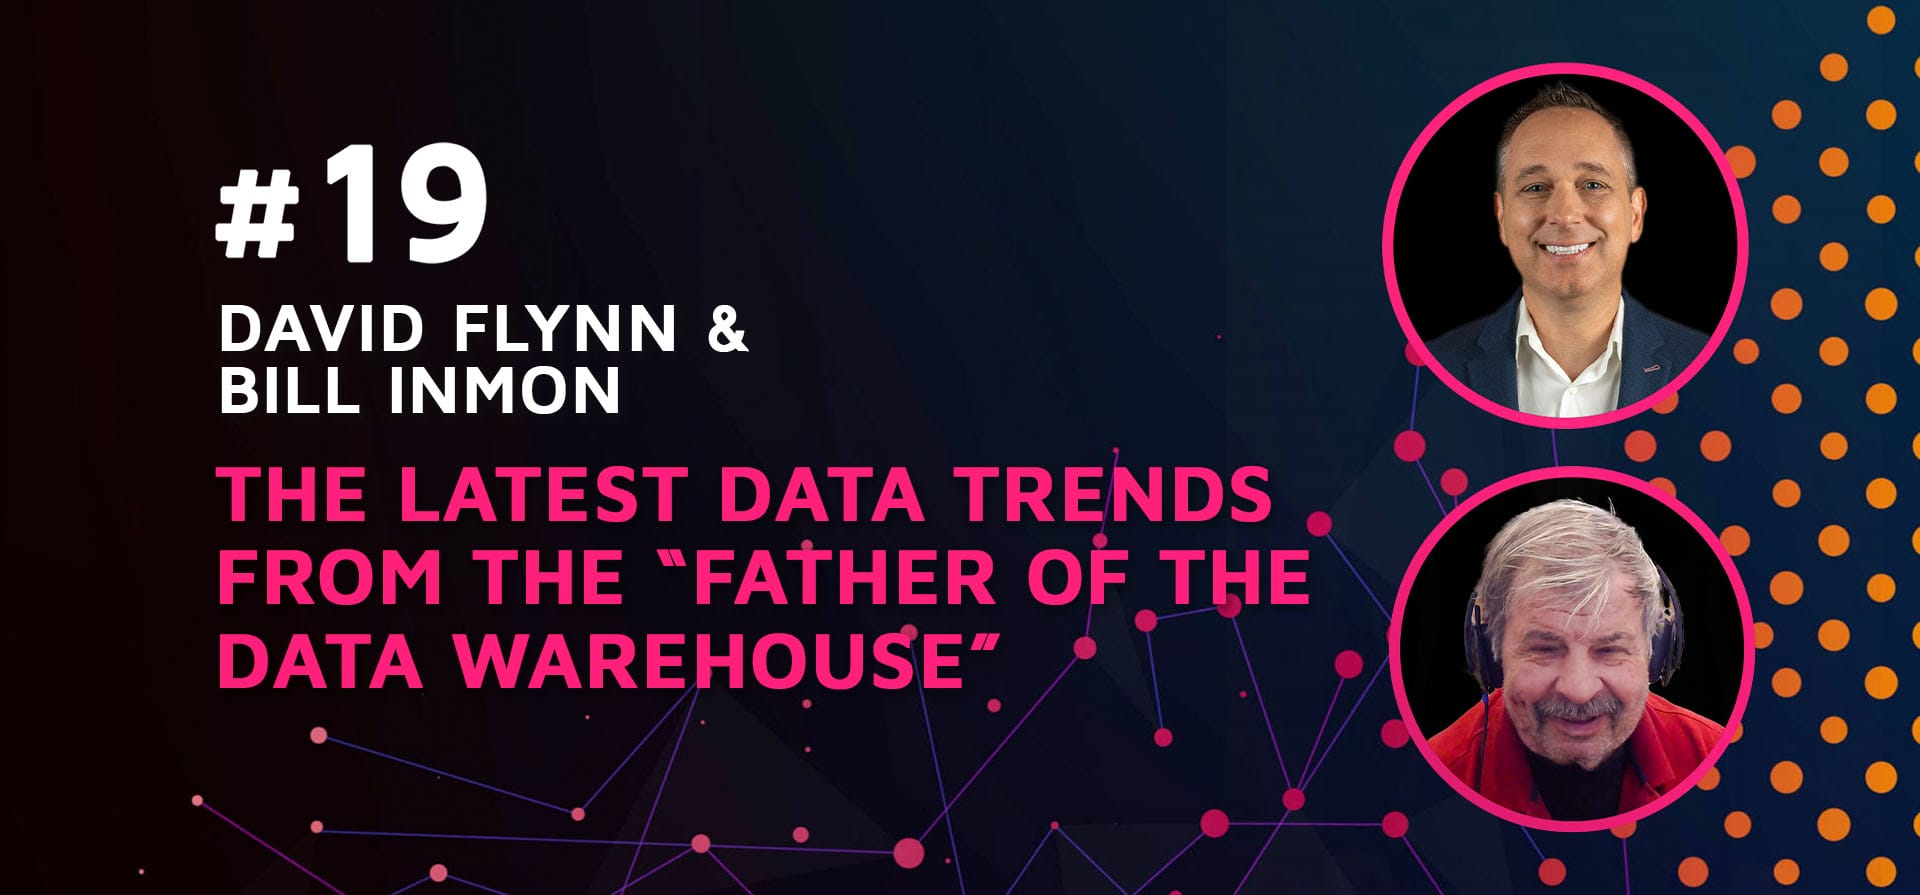 Episode 19: The Latest Data Trends from the “Father of the Data Warehouse” w/Bill Inmon & David Flynn